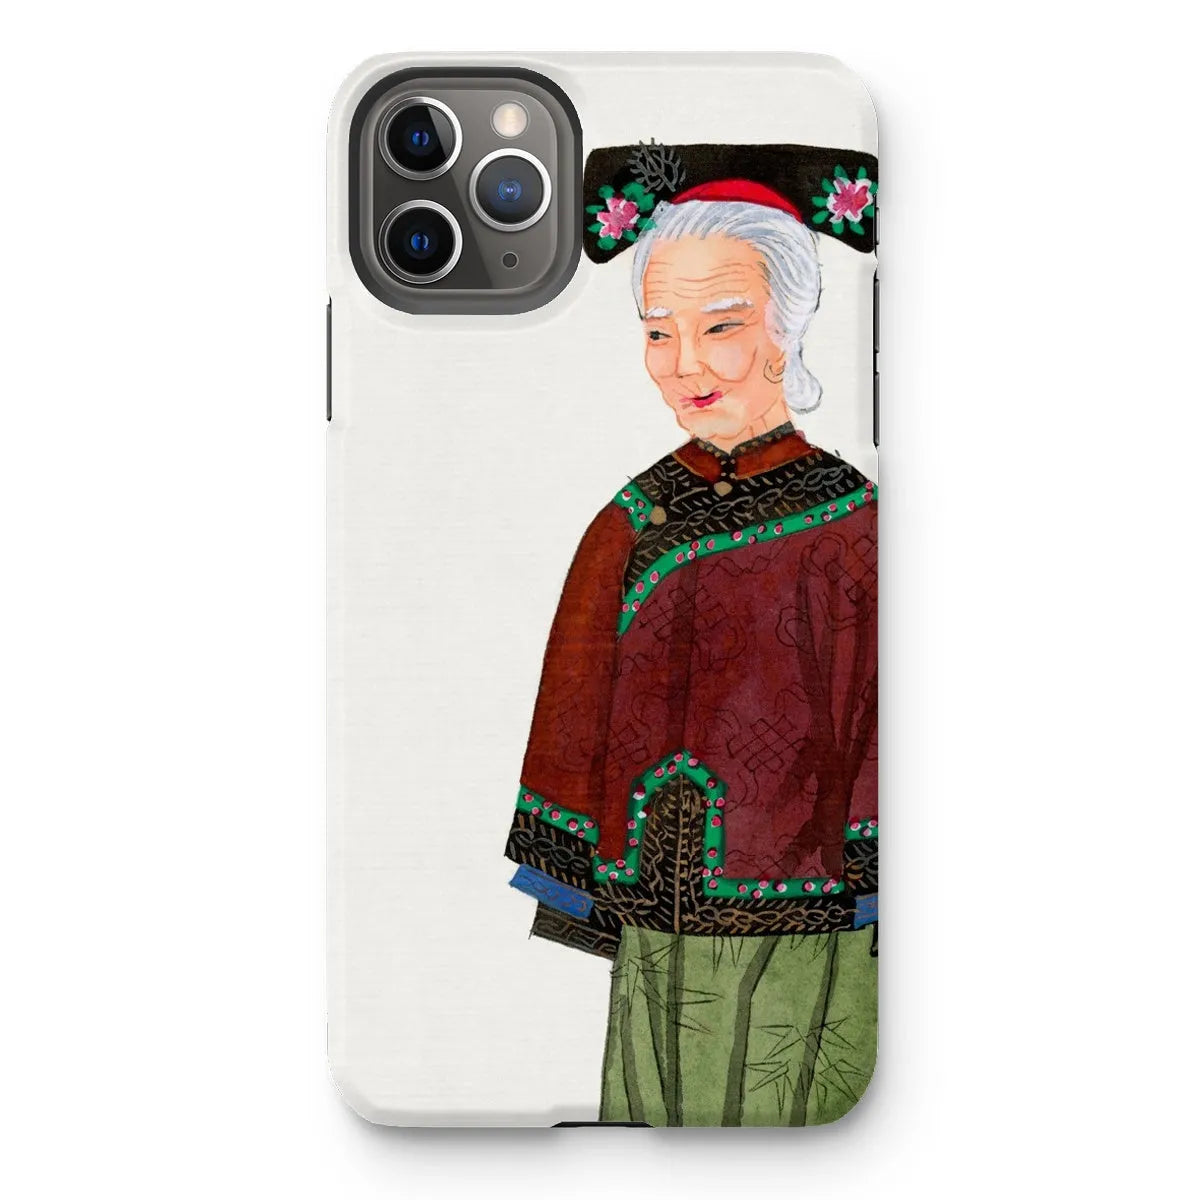 Grand Dame Too - Aesthetic Chinese Art Phone Case - Iphone 11 Pro Max / Matte - Mobile Phone Cases - Aesthetic Art